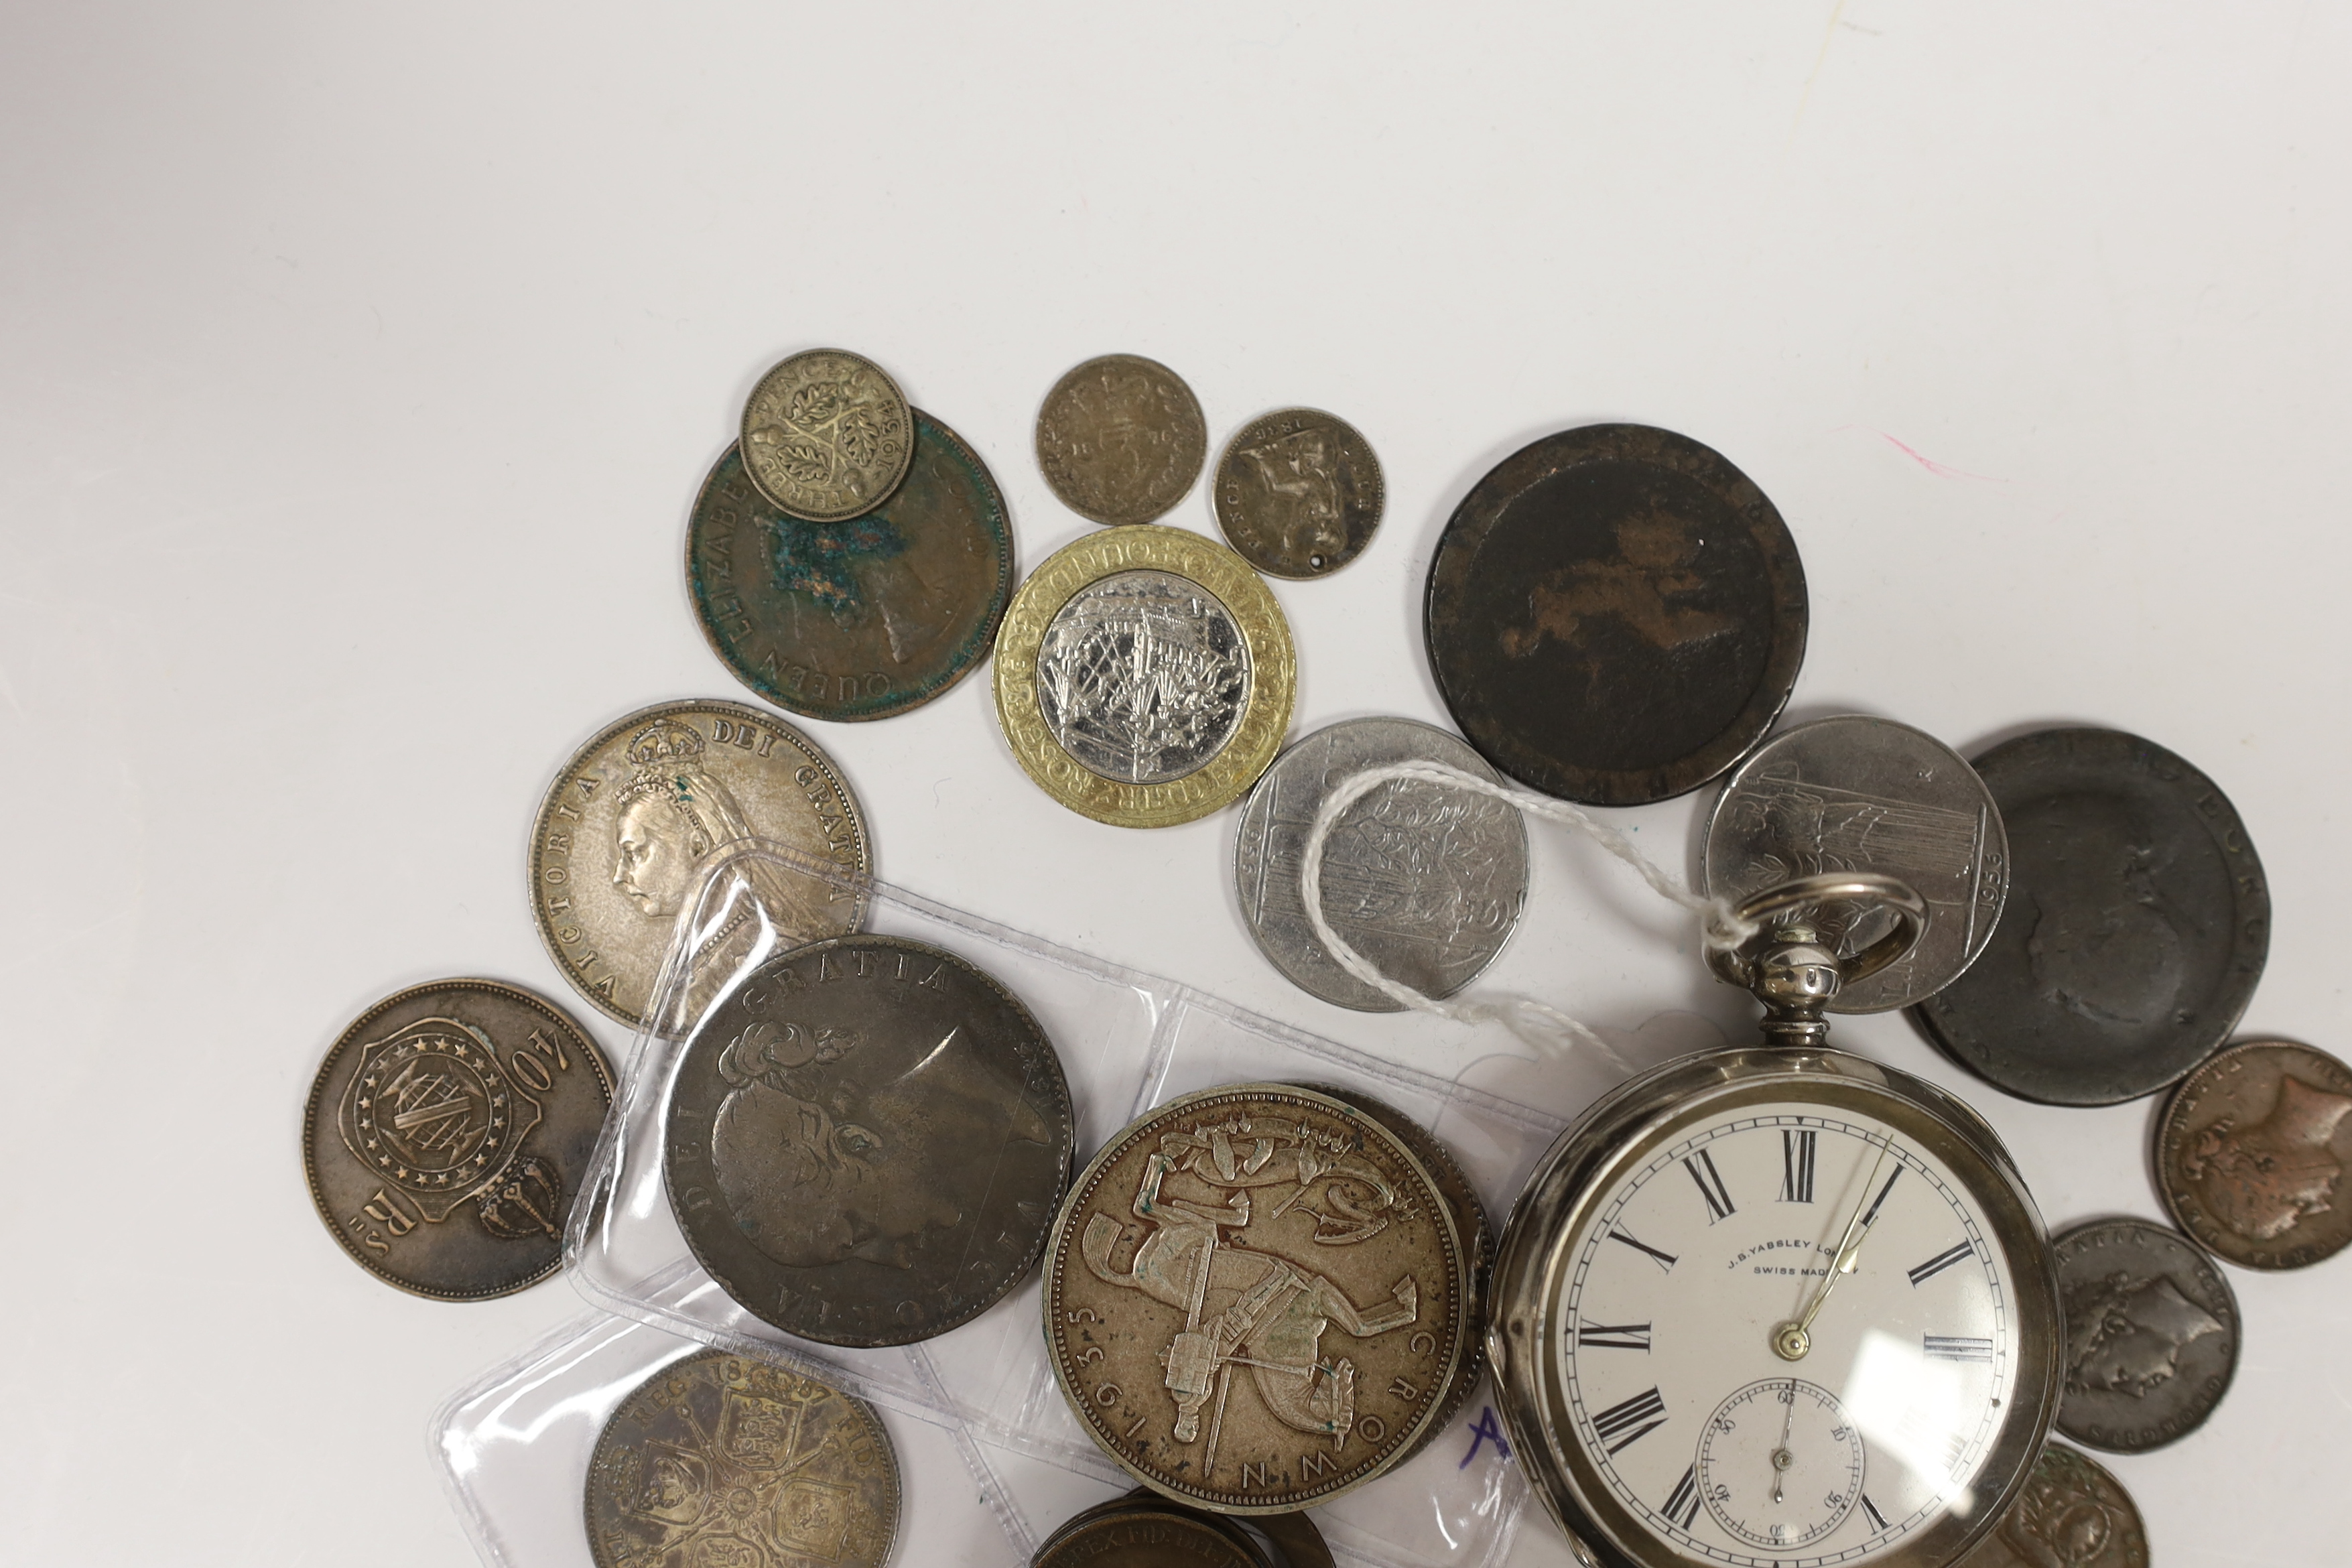 British silver coins, Victoria, two crowns, 1845, double florin 1887, florin 1887, halfcrown 1887 and other various crowns, together with a Swiss silver pocket watch